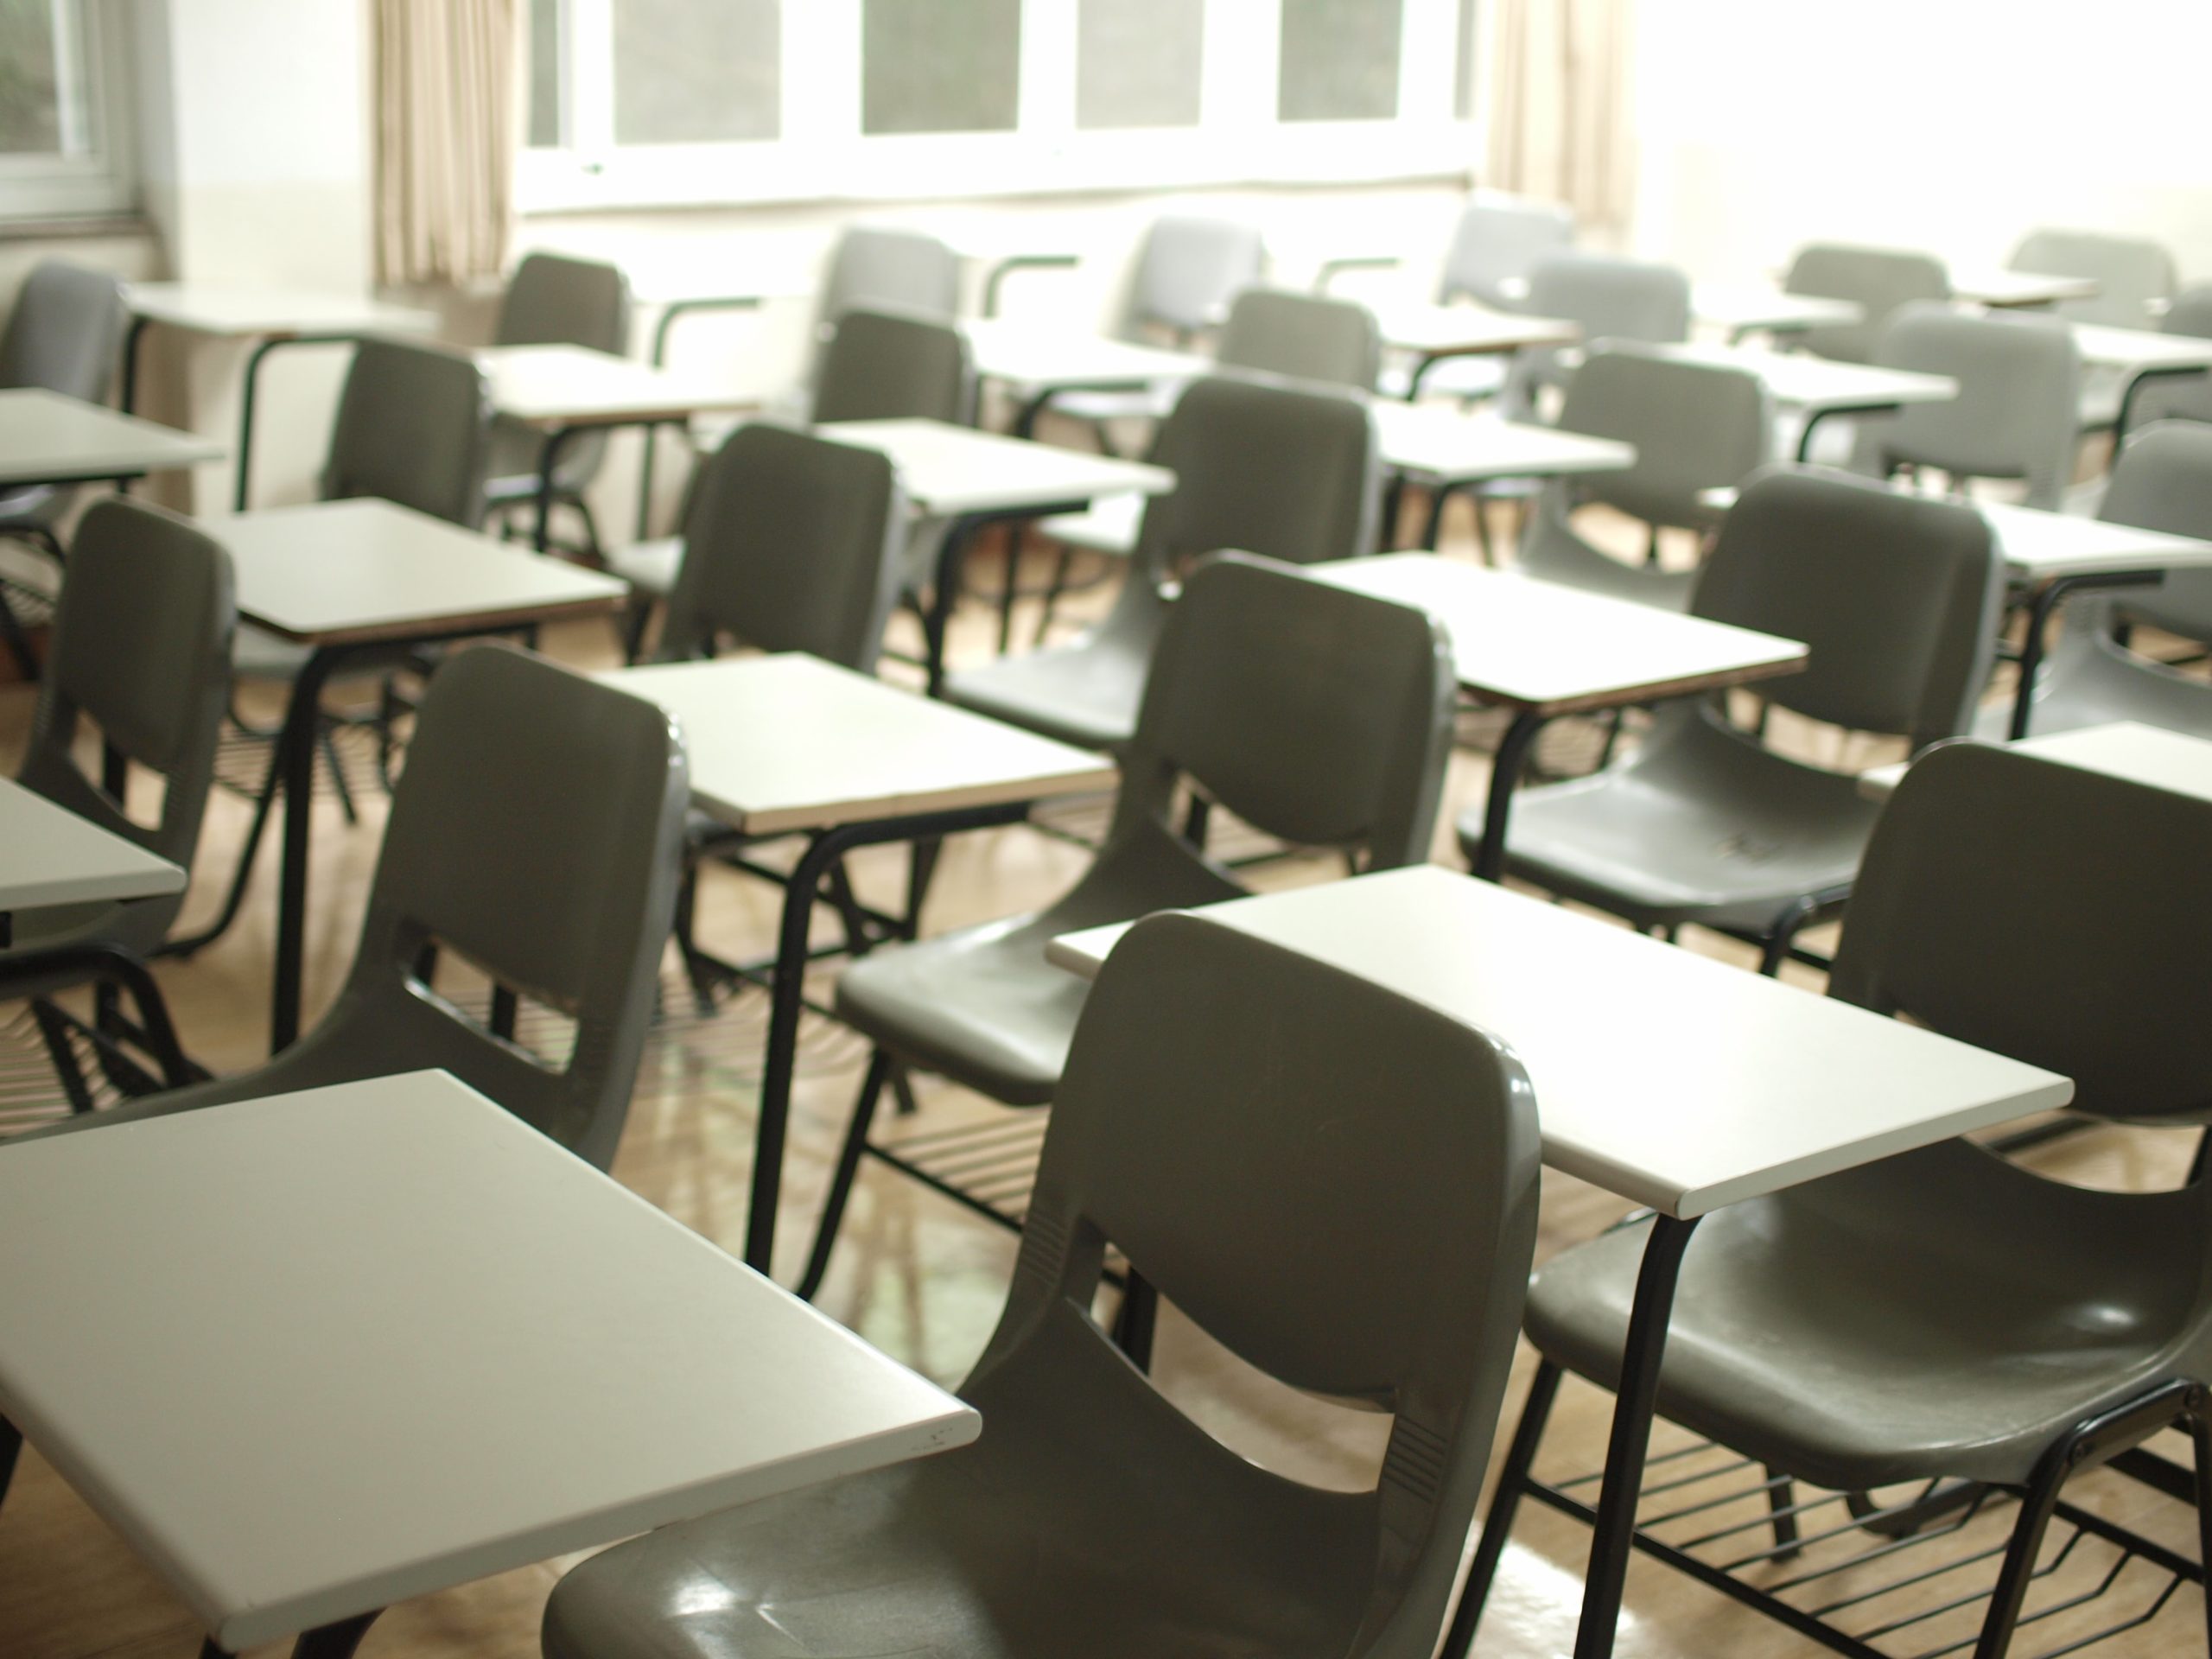 A photo of an exam hall with rows of empty plastic chairs